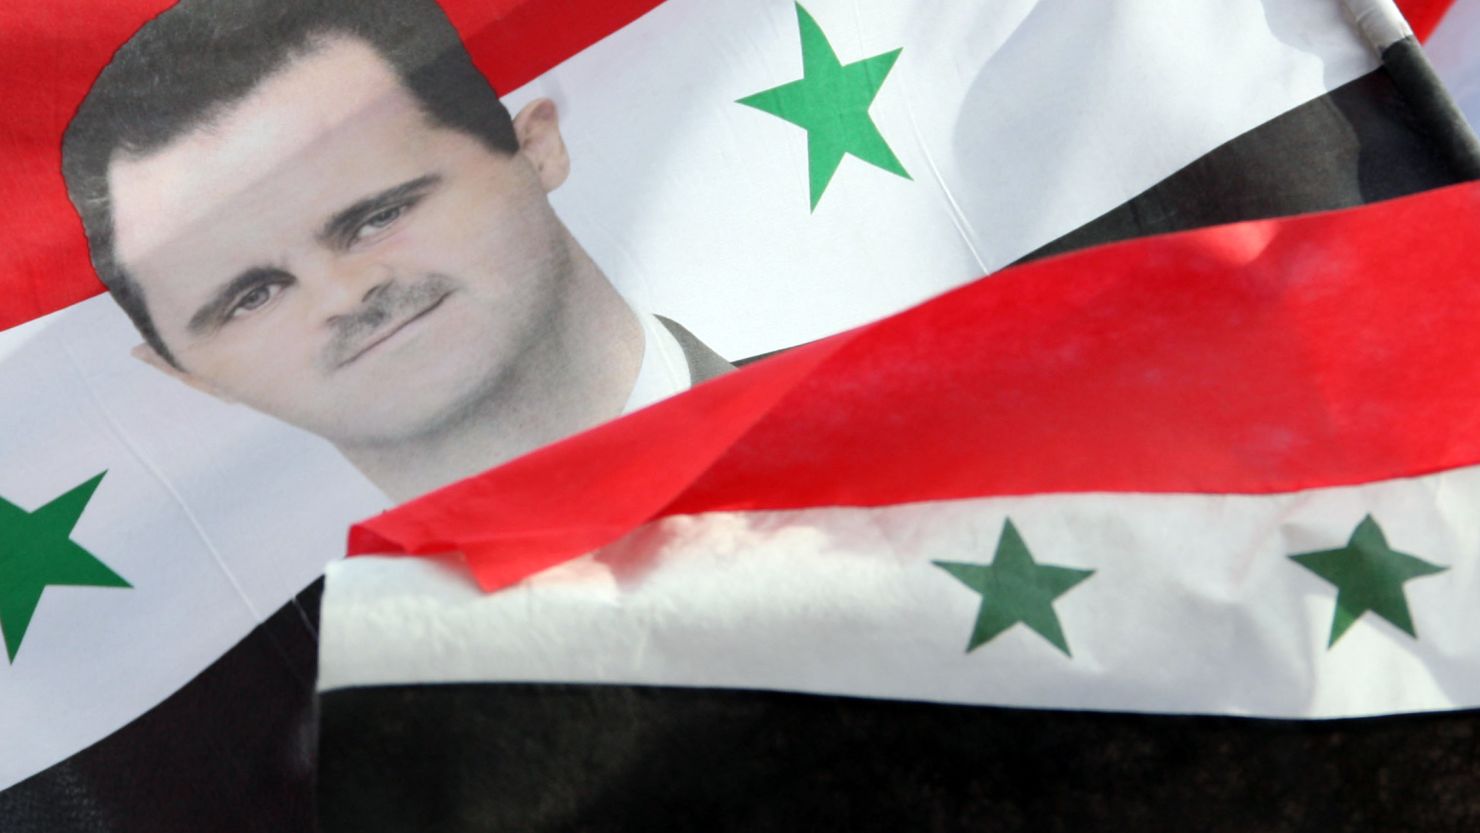  Pro-regime supporters hold up flag showing President al-Assad at a rally in Damascus, while opposition leaders warn of a brutal crackdown by the military.